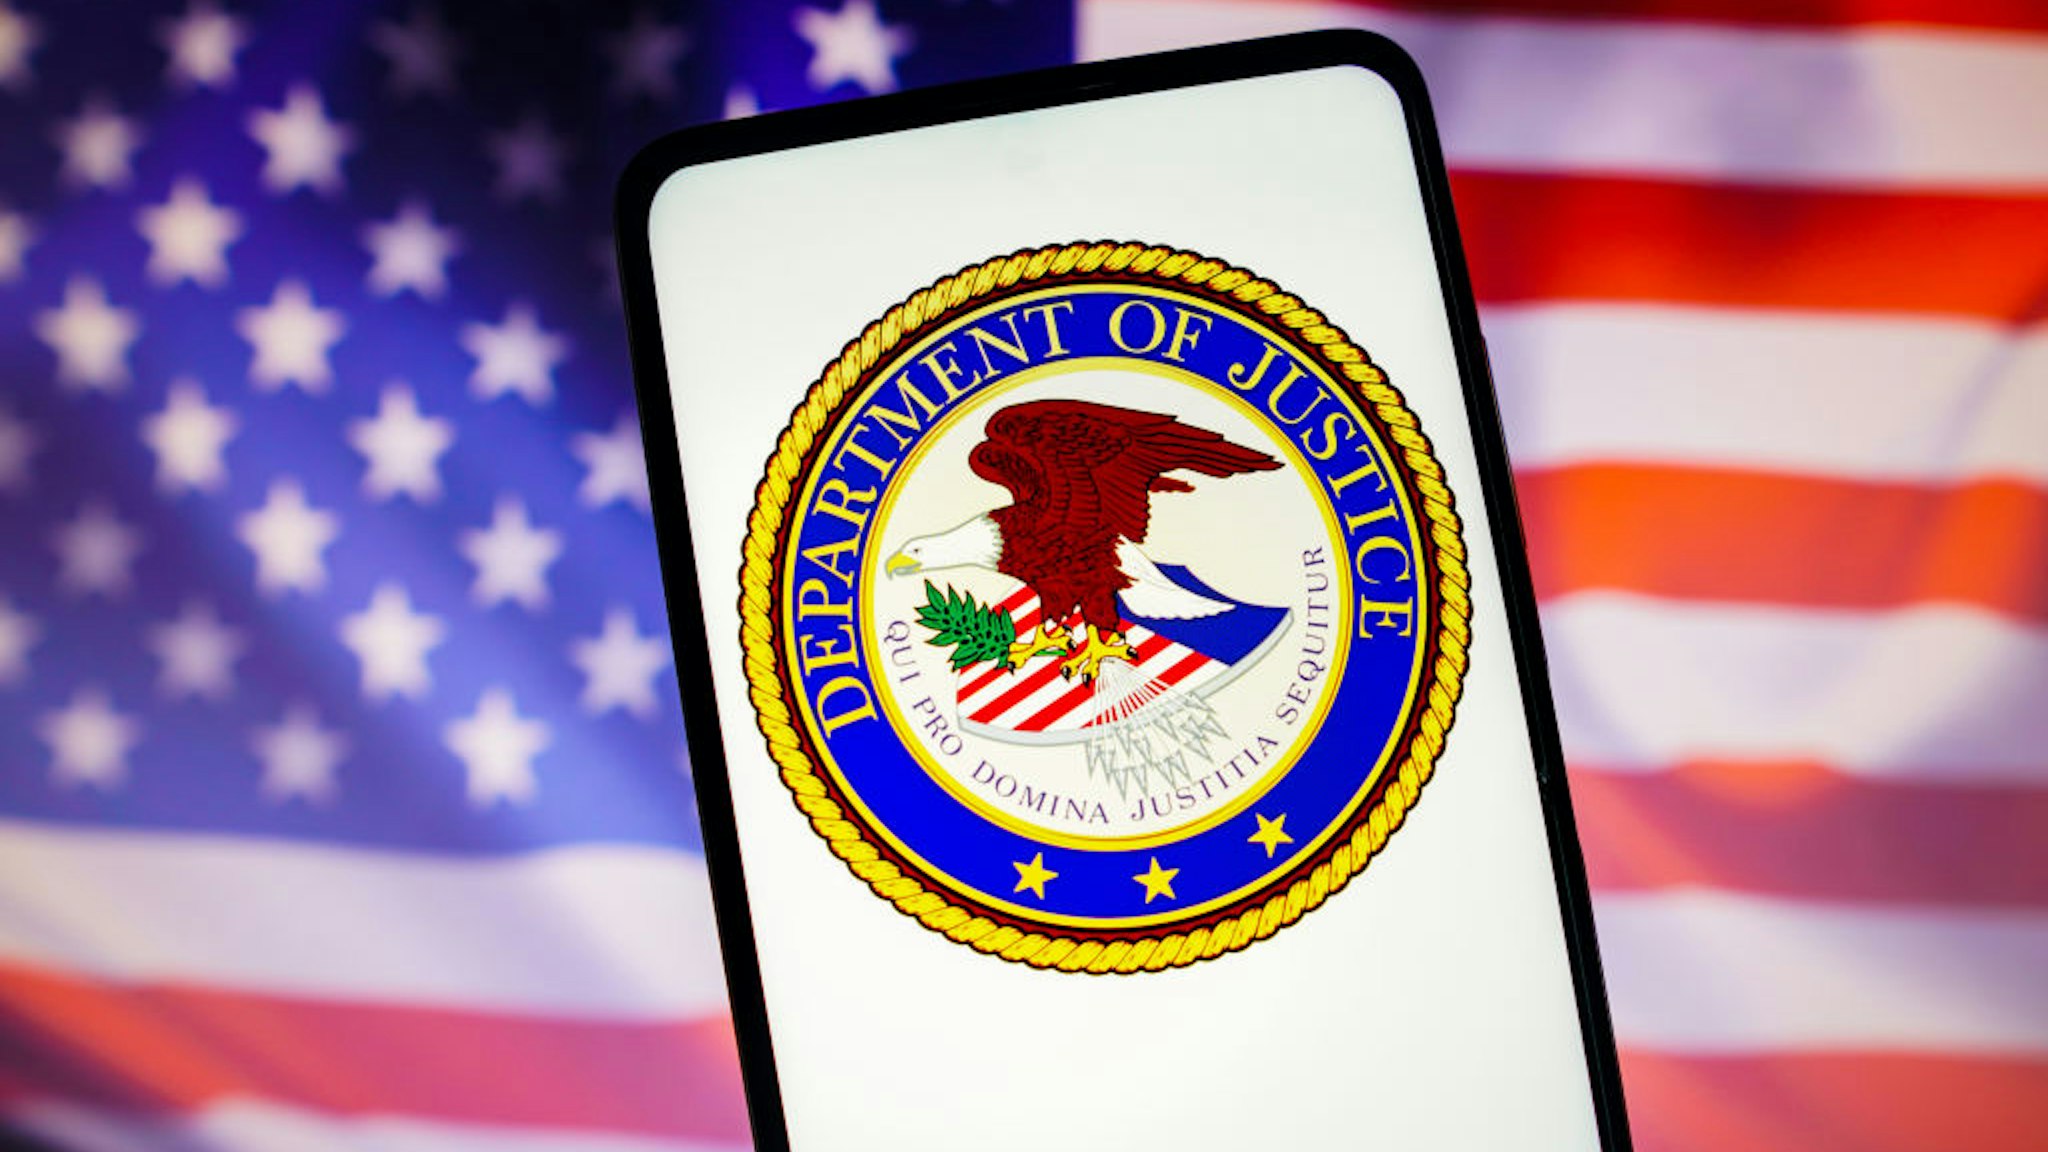 BRAZIL - 2022/11/13: In this photo illustration, the United States Department of Justice (DOJ) logo is displayed on a smartphone screen with a United States flag in the background. (Photo Illustration by Rafael Henrique/SOPA Images/LightRocket via Getty Images)